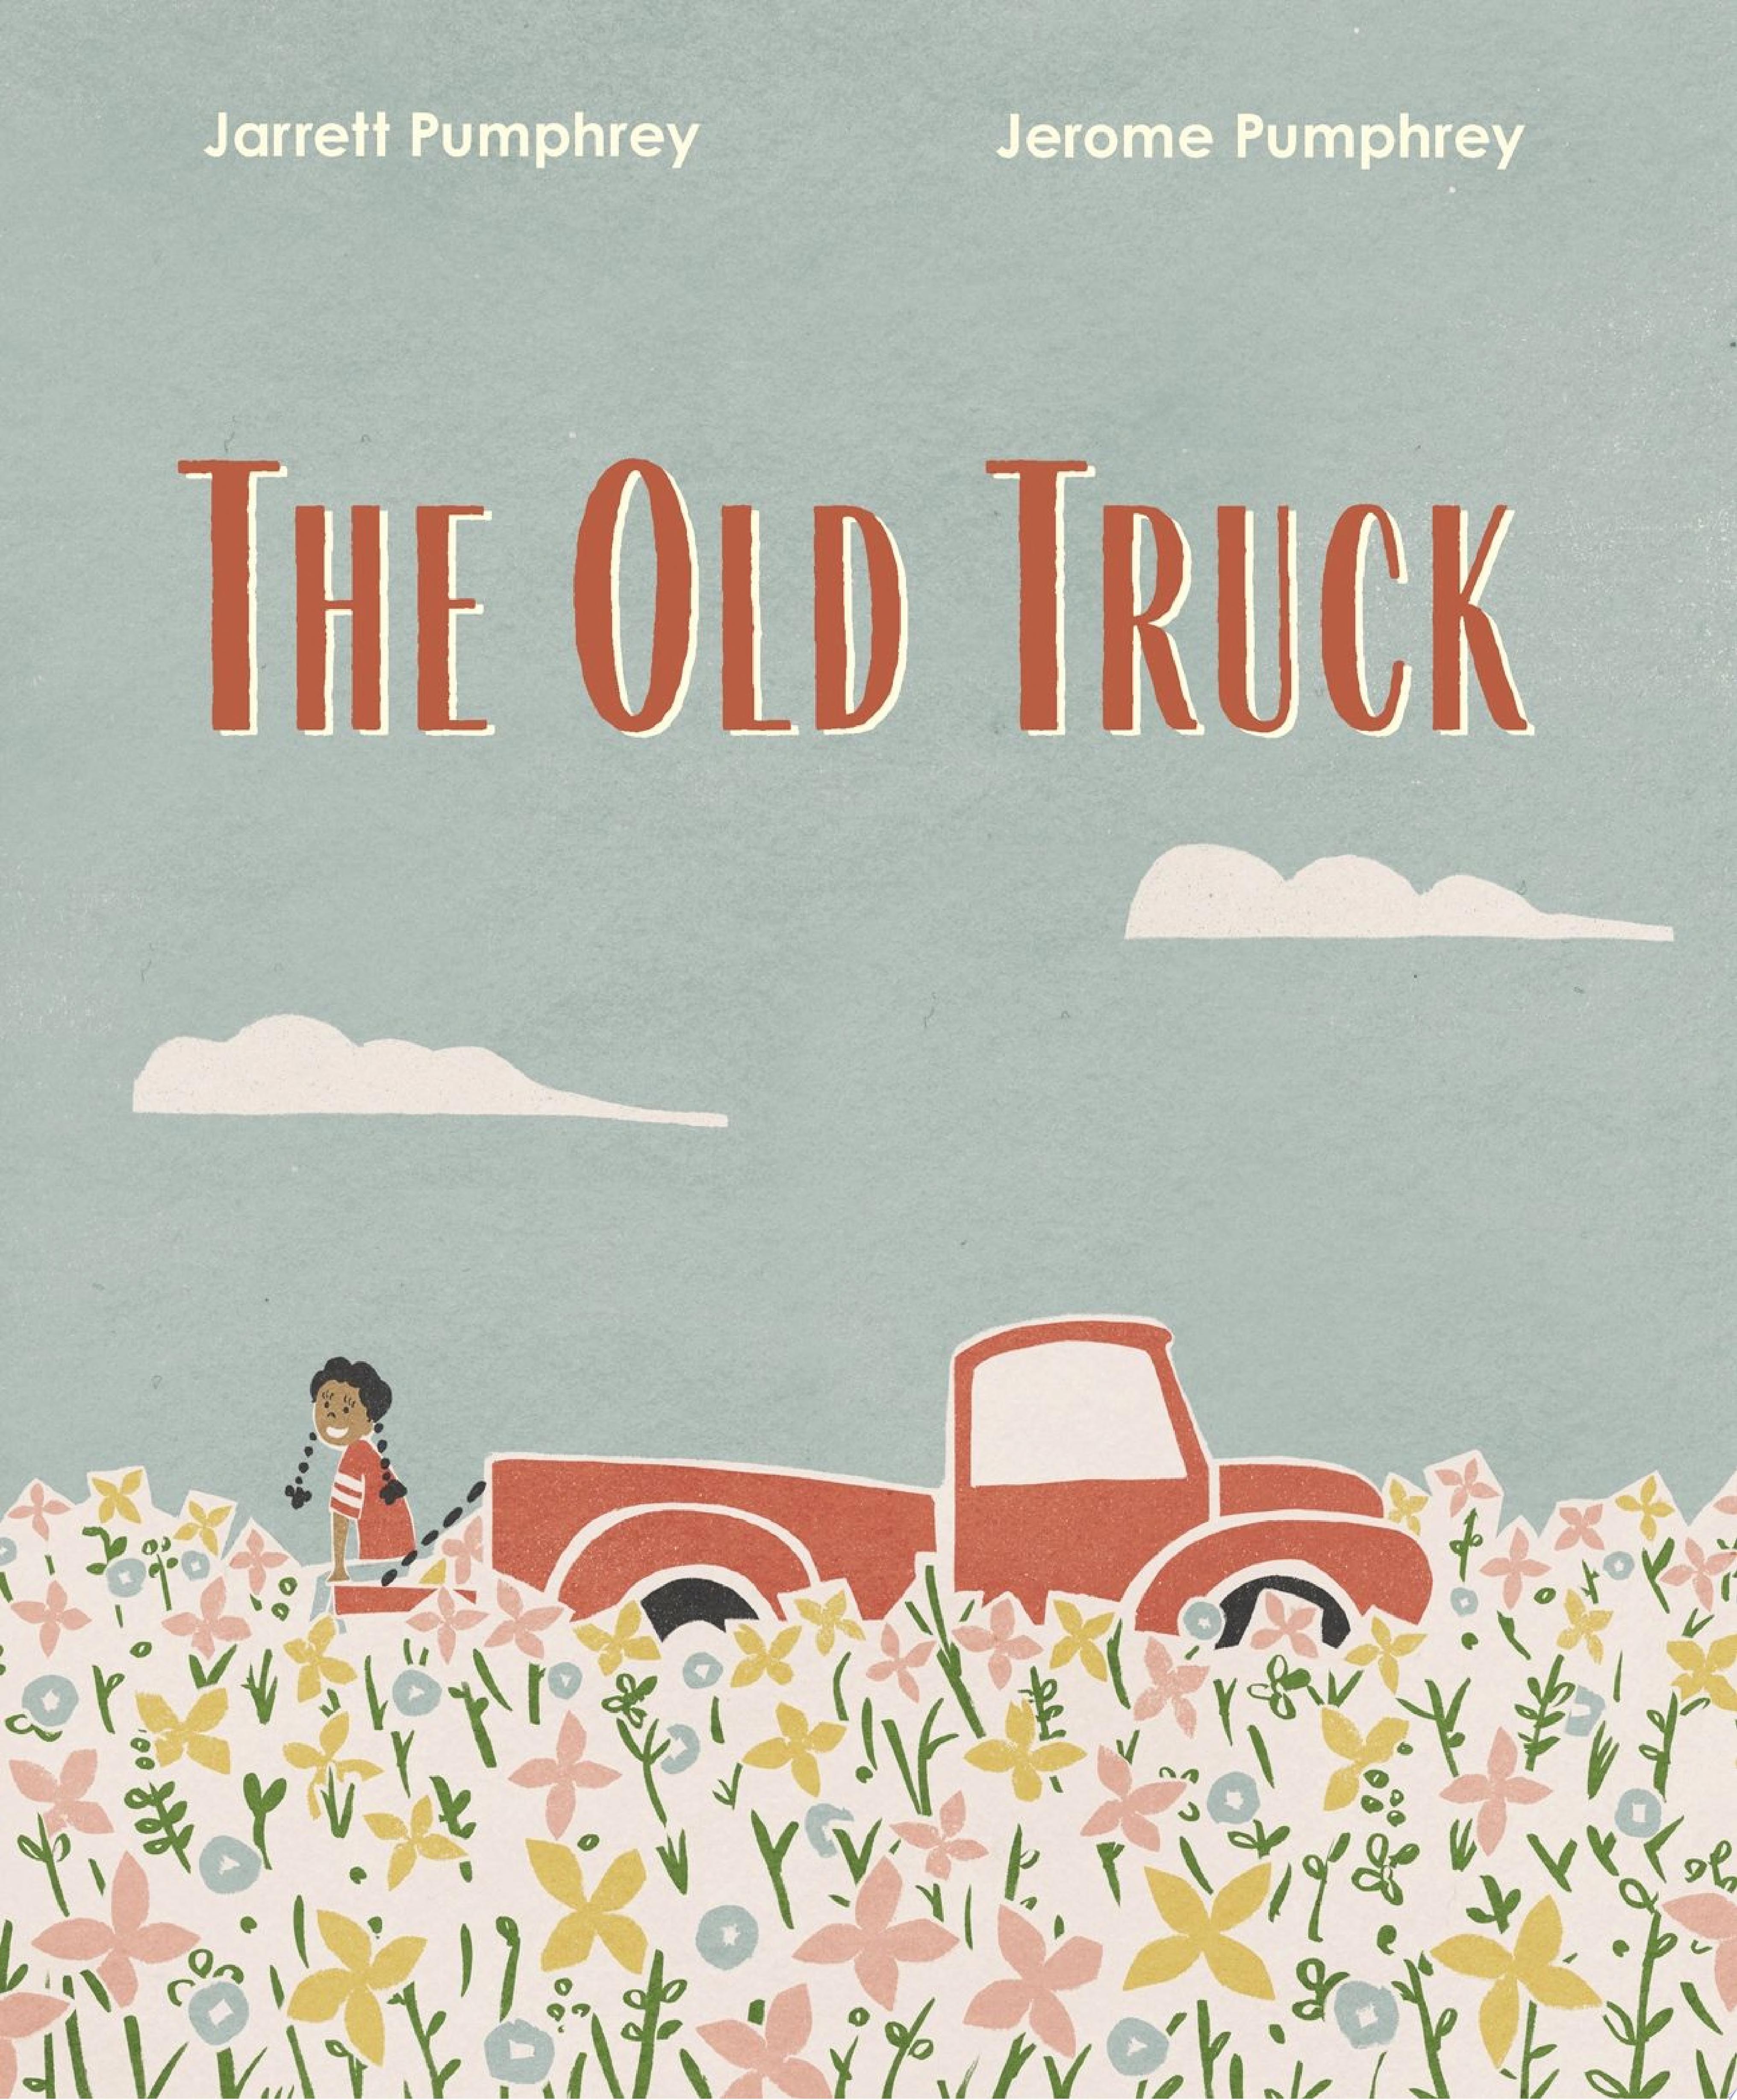 Image for "The Old Truck"